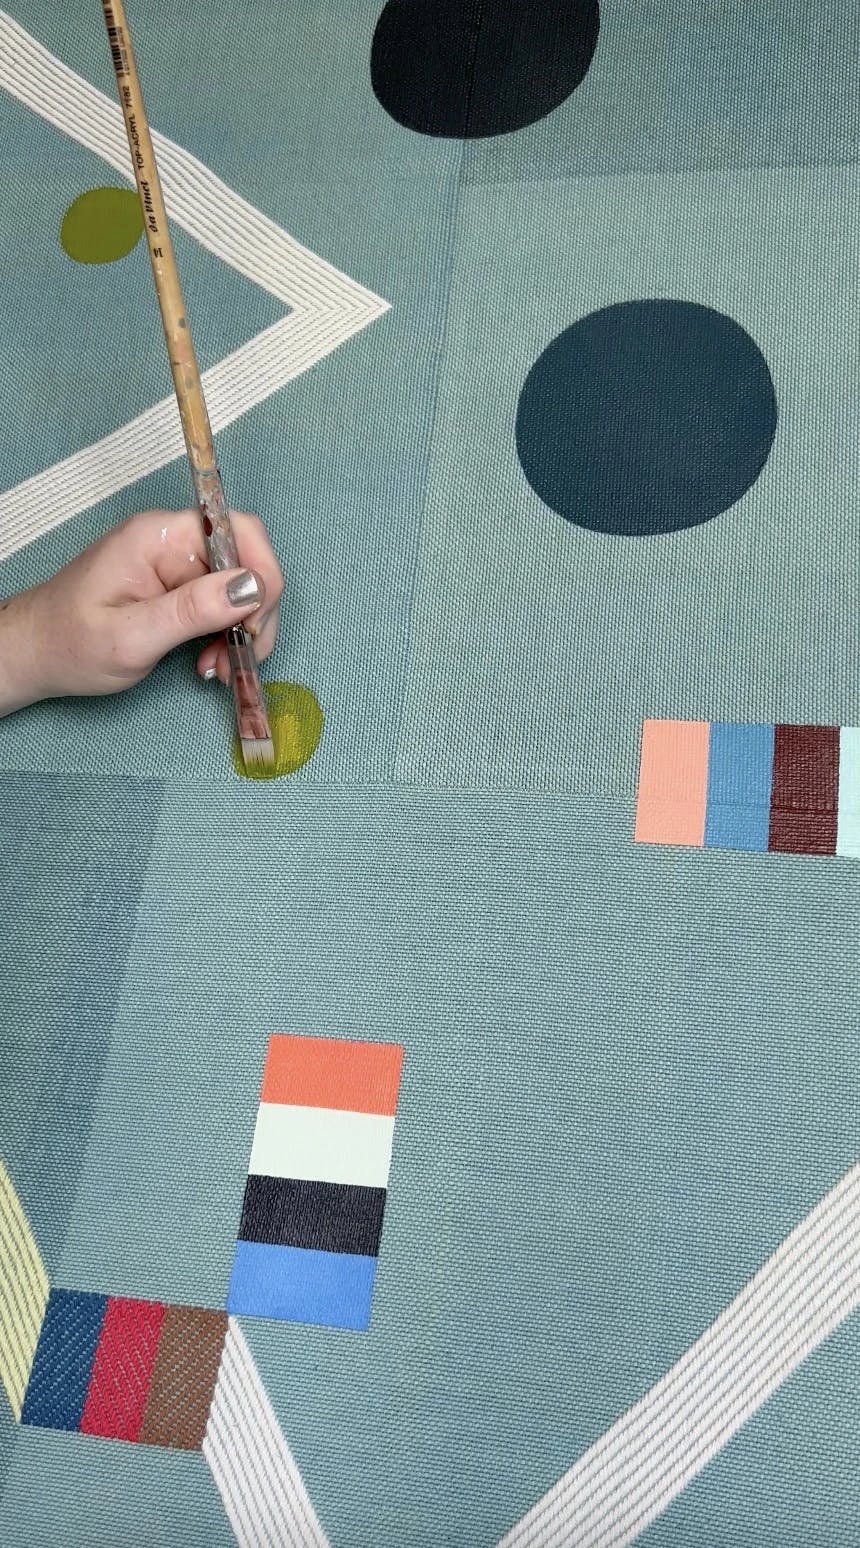 A close-up of artist Sarah Sullivan Sherrod holding a paintbrush and painting a small green circle on a handwoven canvas.